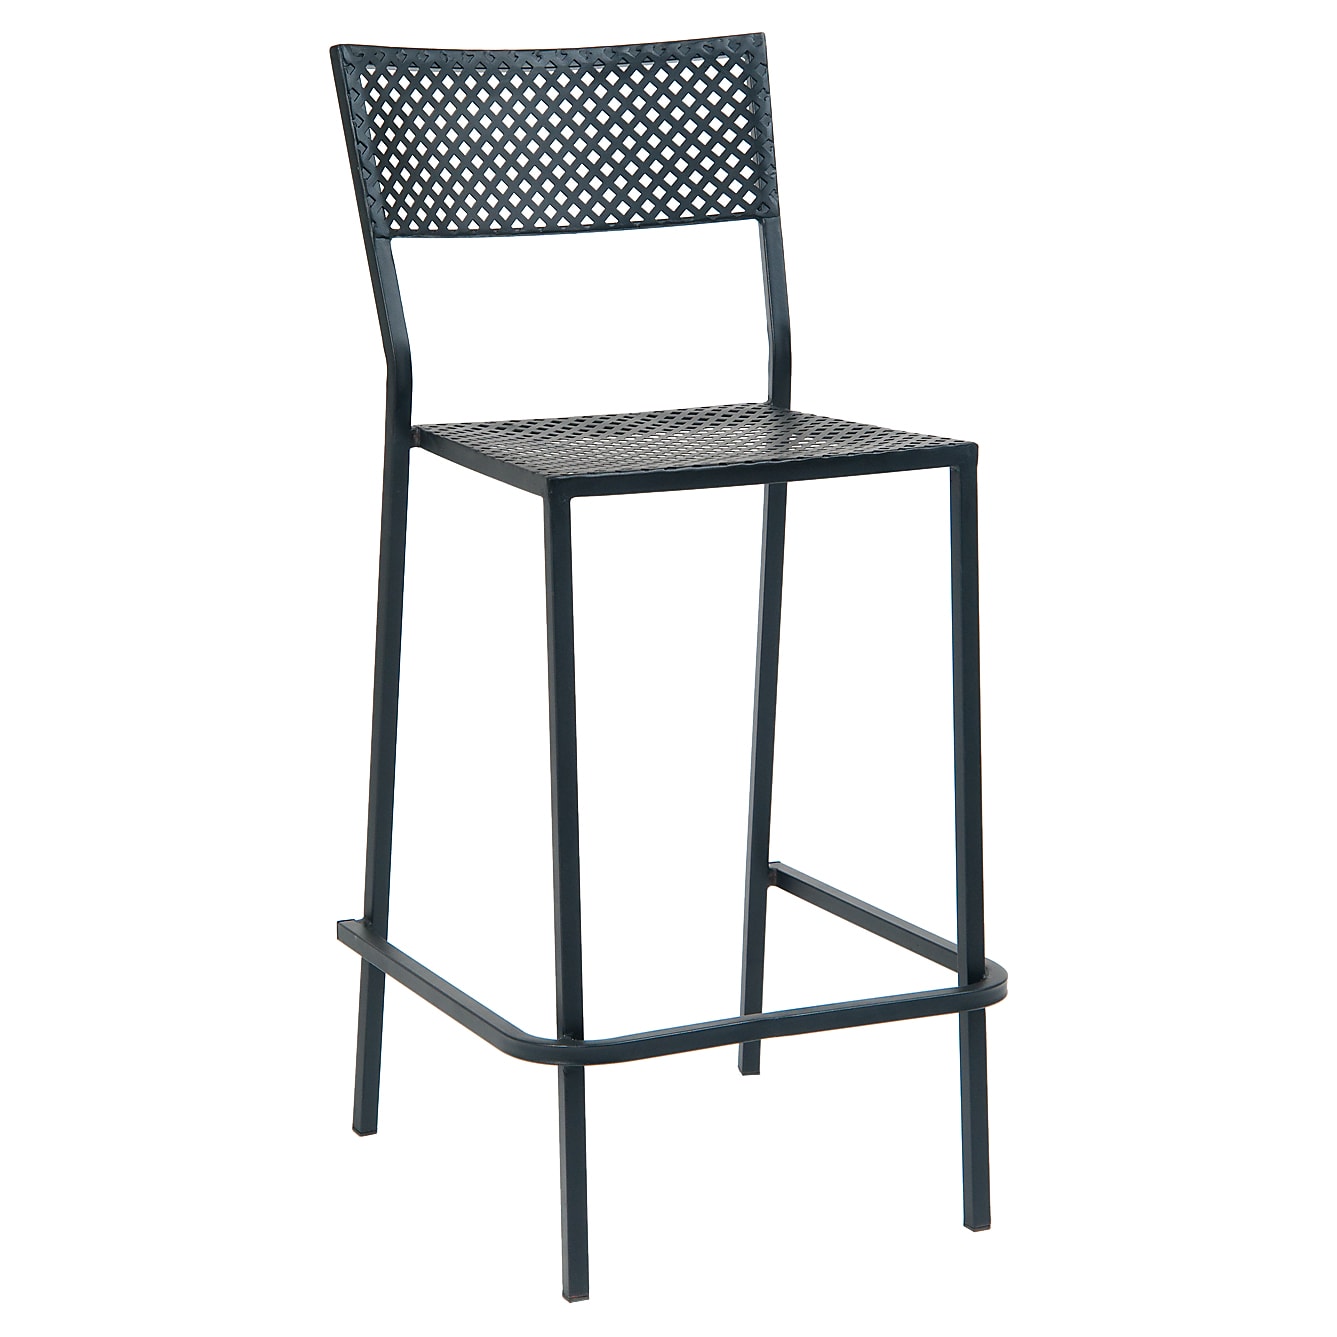 Checkered Outdoor Bar Stool in Black Finish